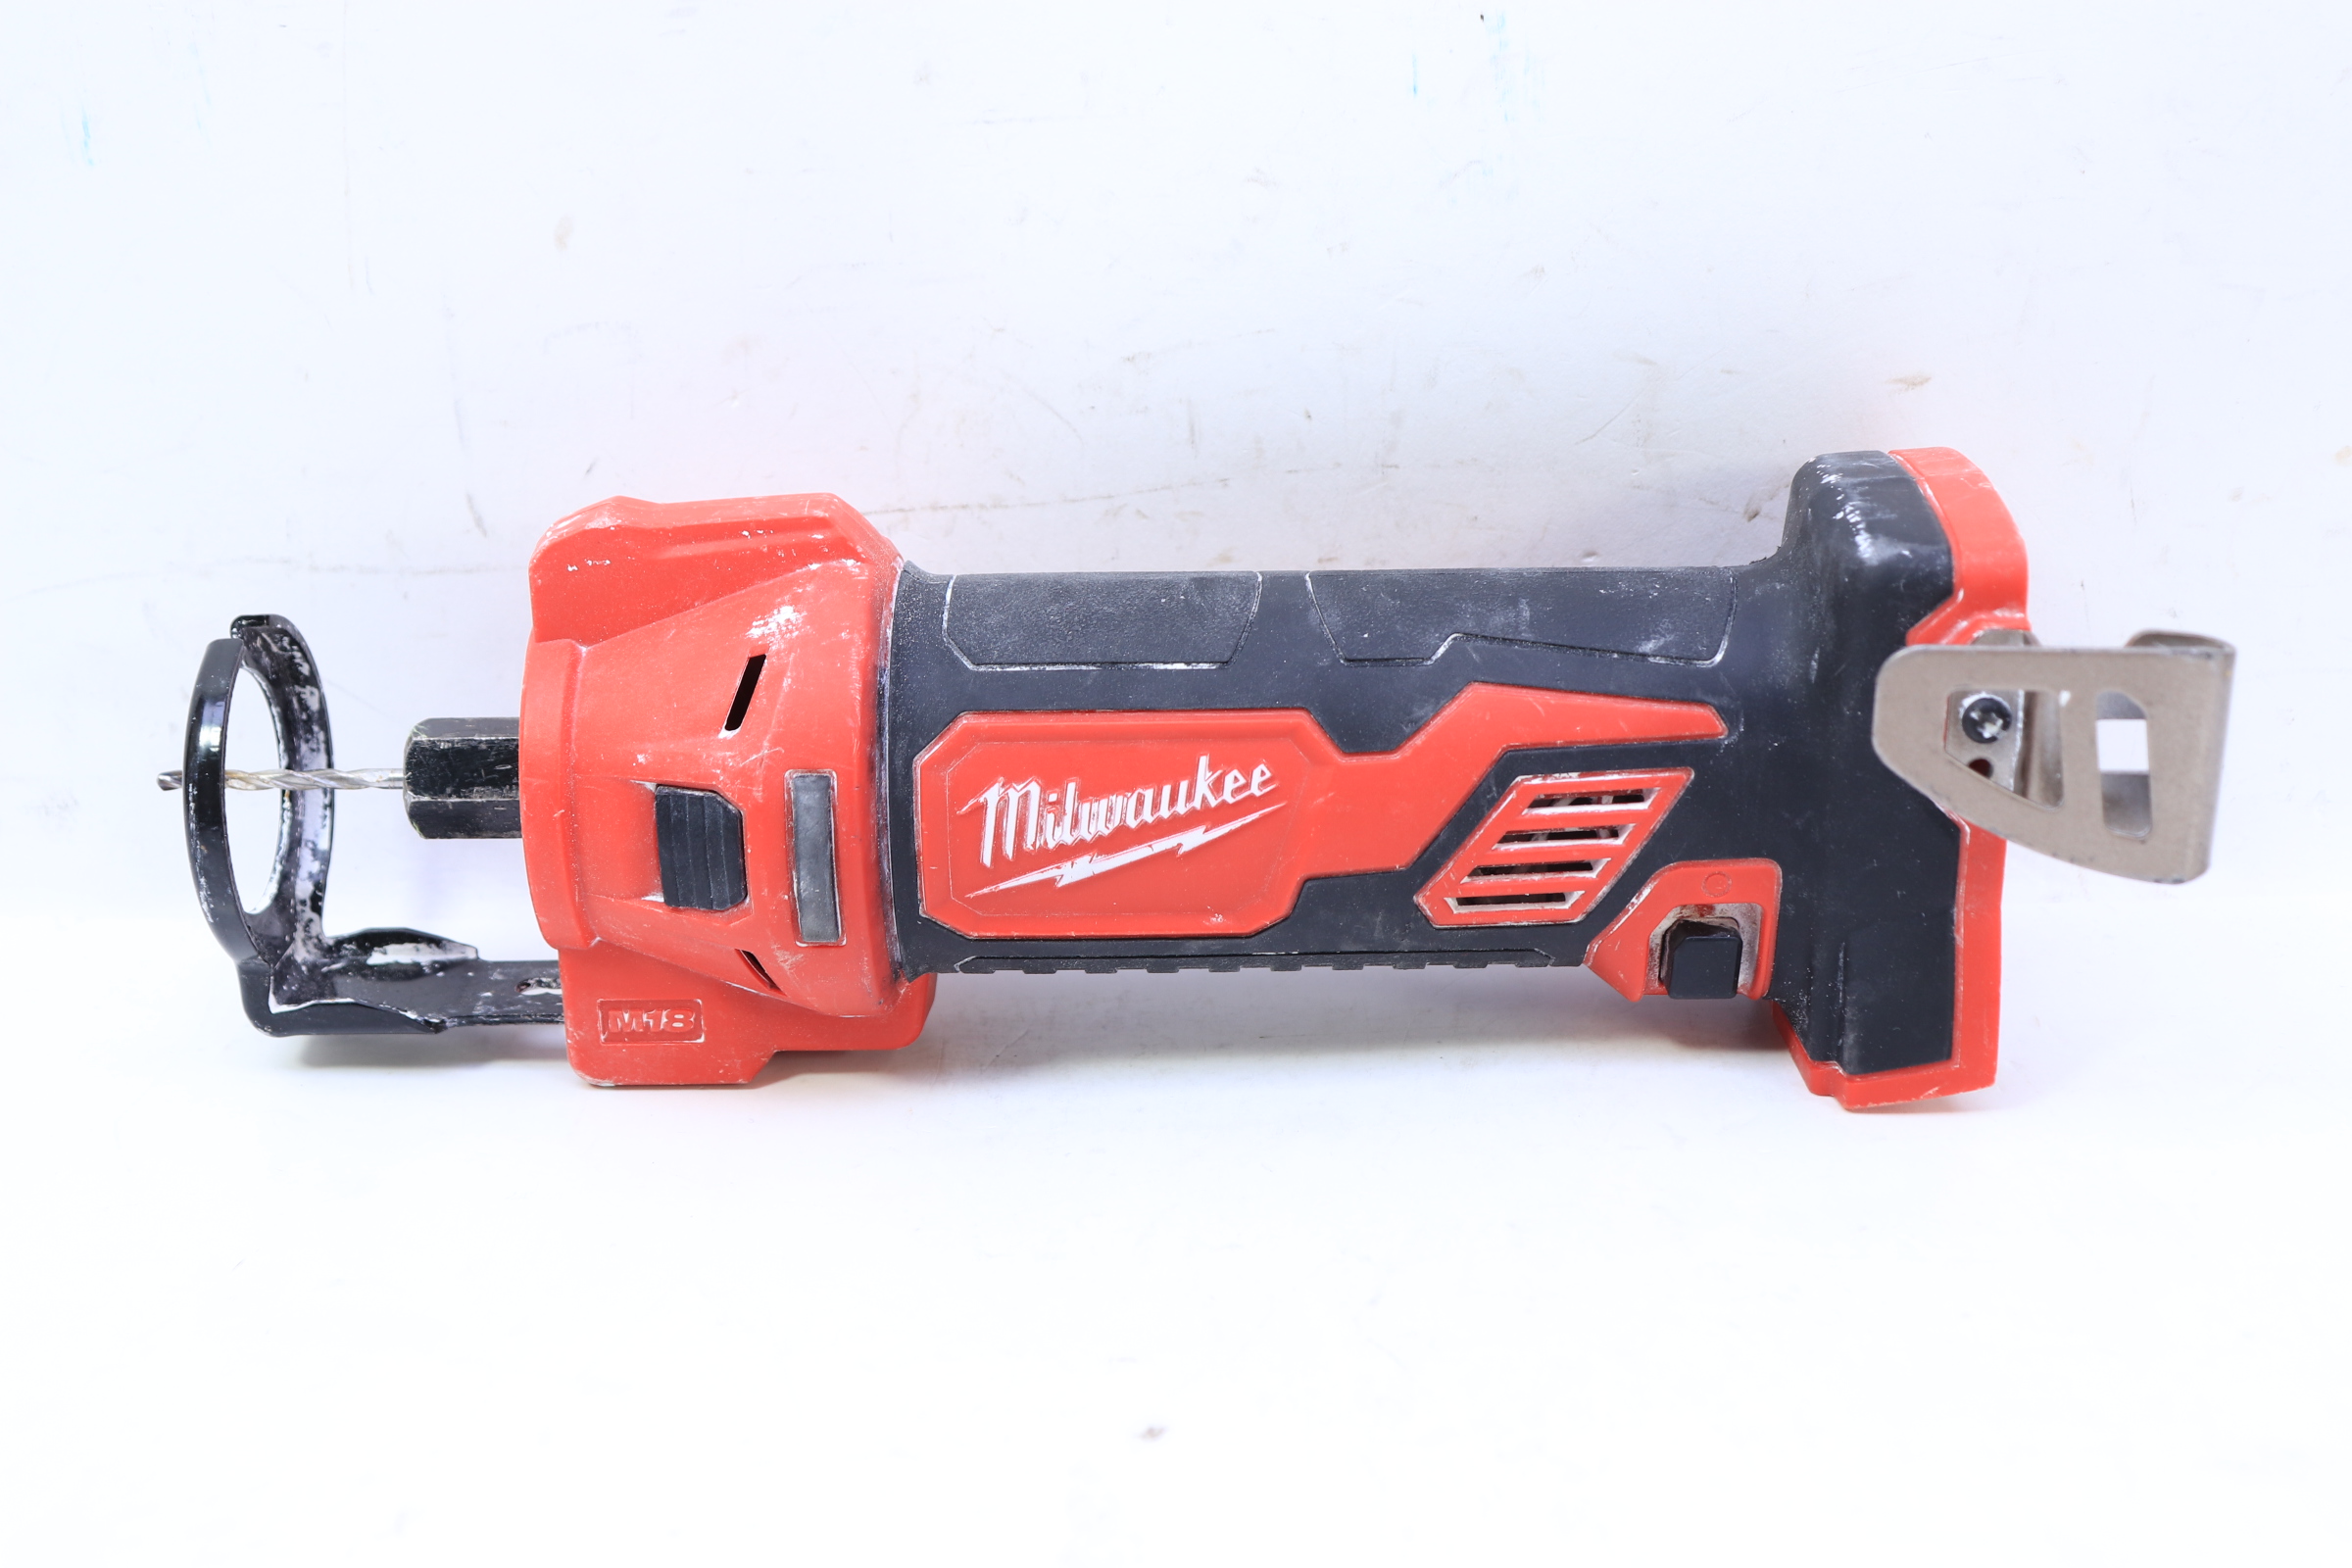 Milwaukee M18 18V Lithium-Ion Cordless Drywall Cut Out Rotary Tool  (Tool-Only) 2627-20 - The Home Depot